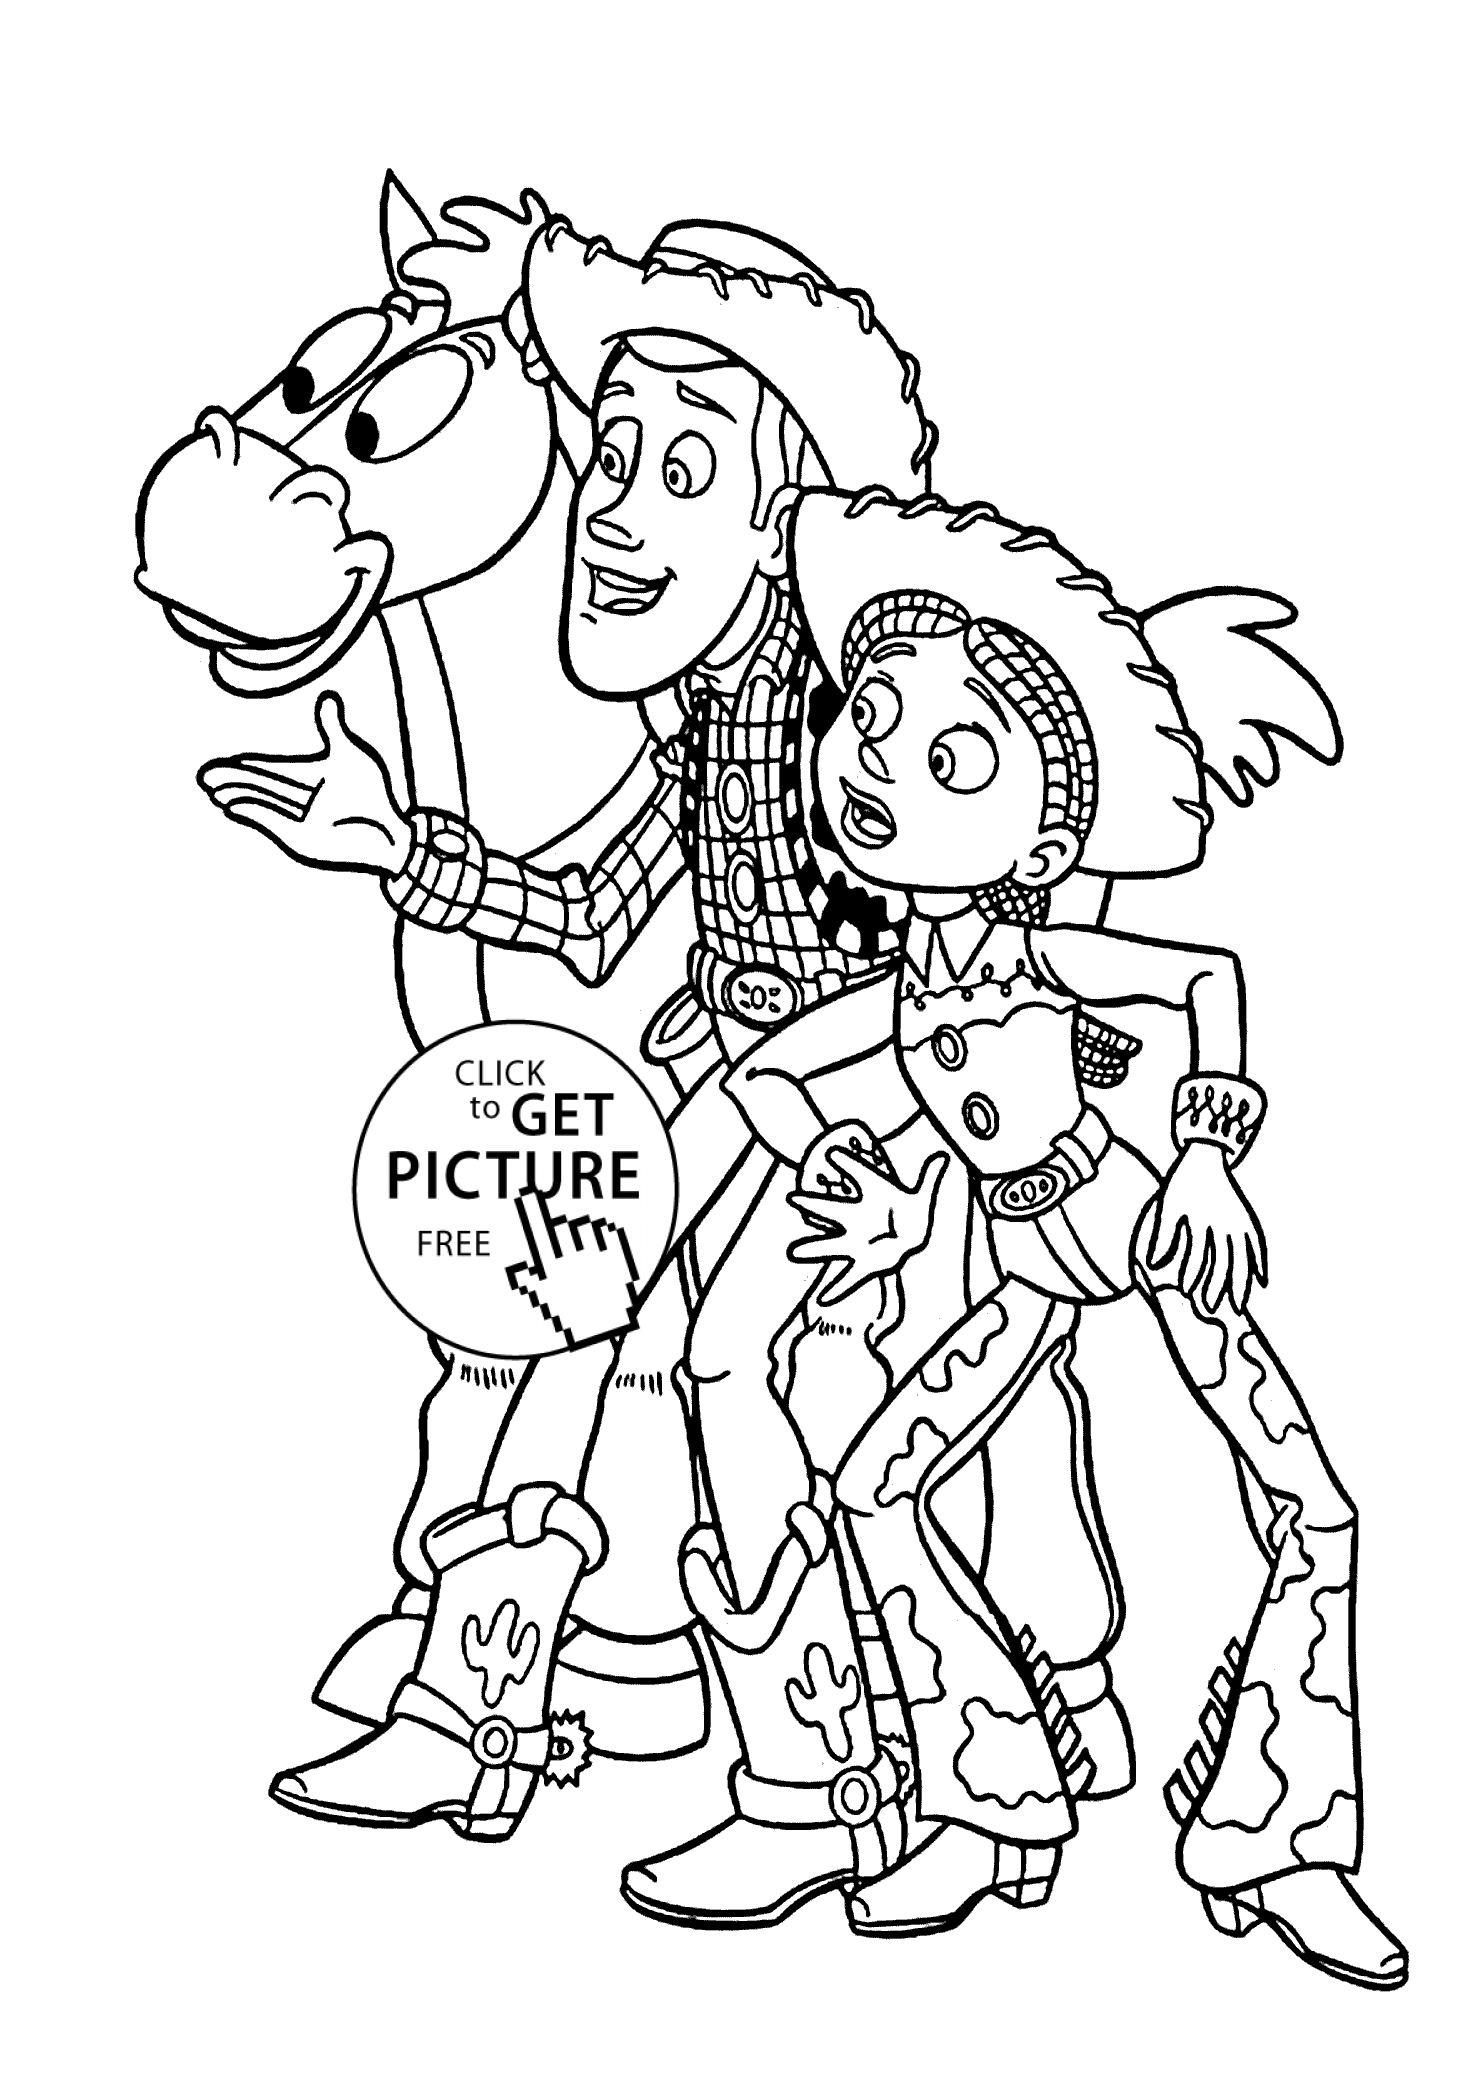 Cowboys from Toy story coloring pages for kids, printable free